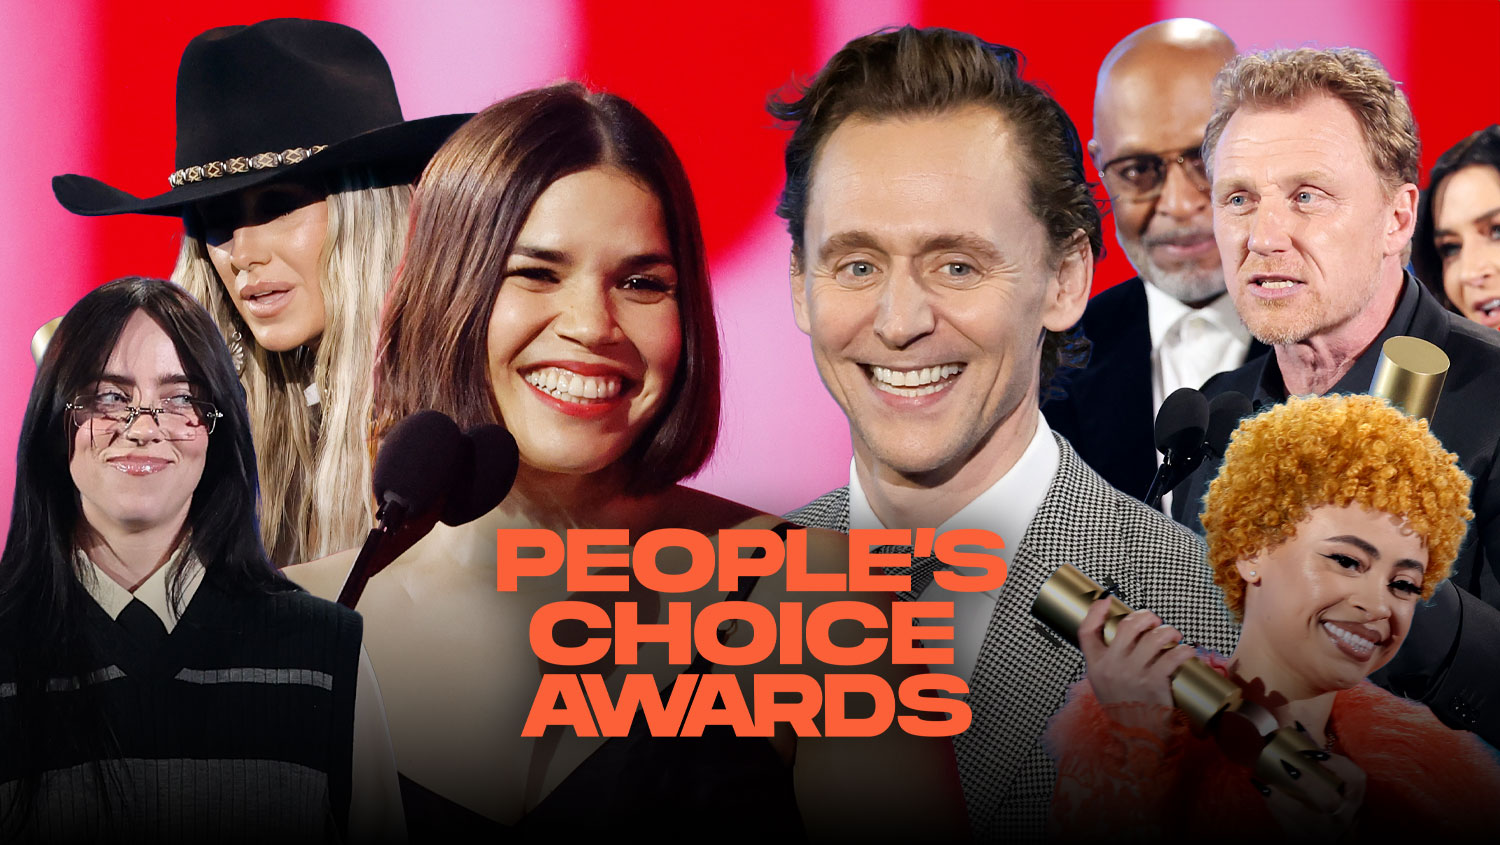 What awards are given at the People's Choice awards? ABTC